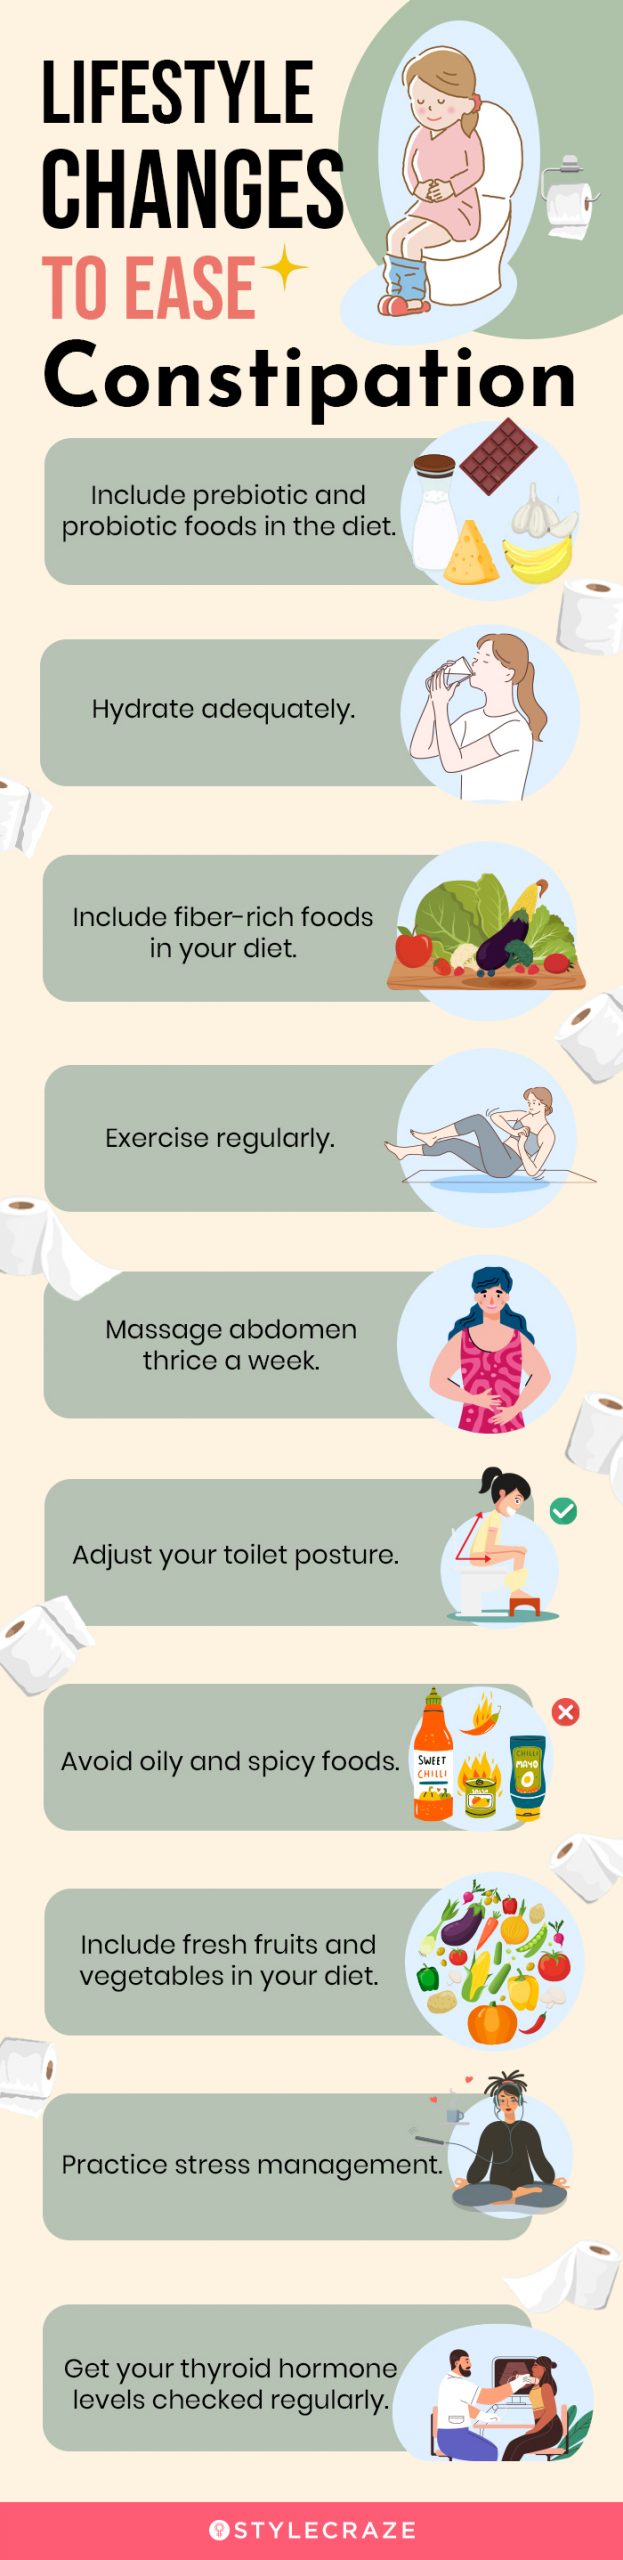 lifestyle changes to ease constipation (infographic)